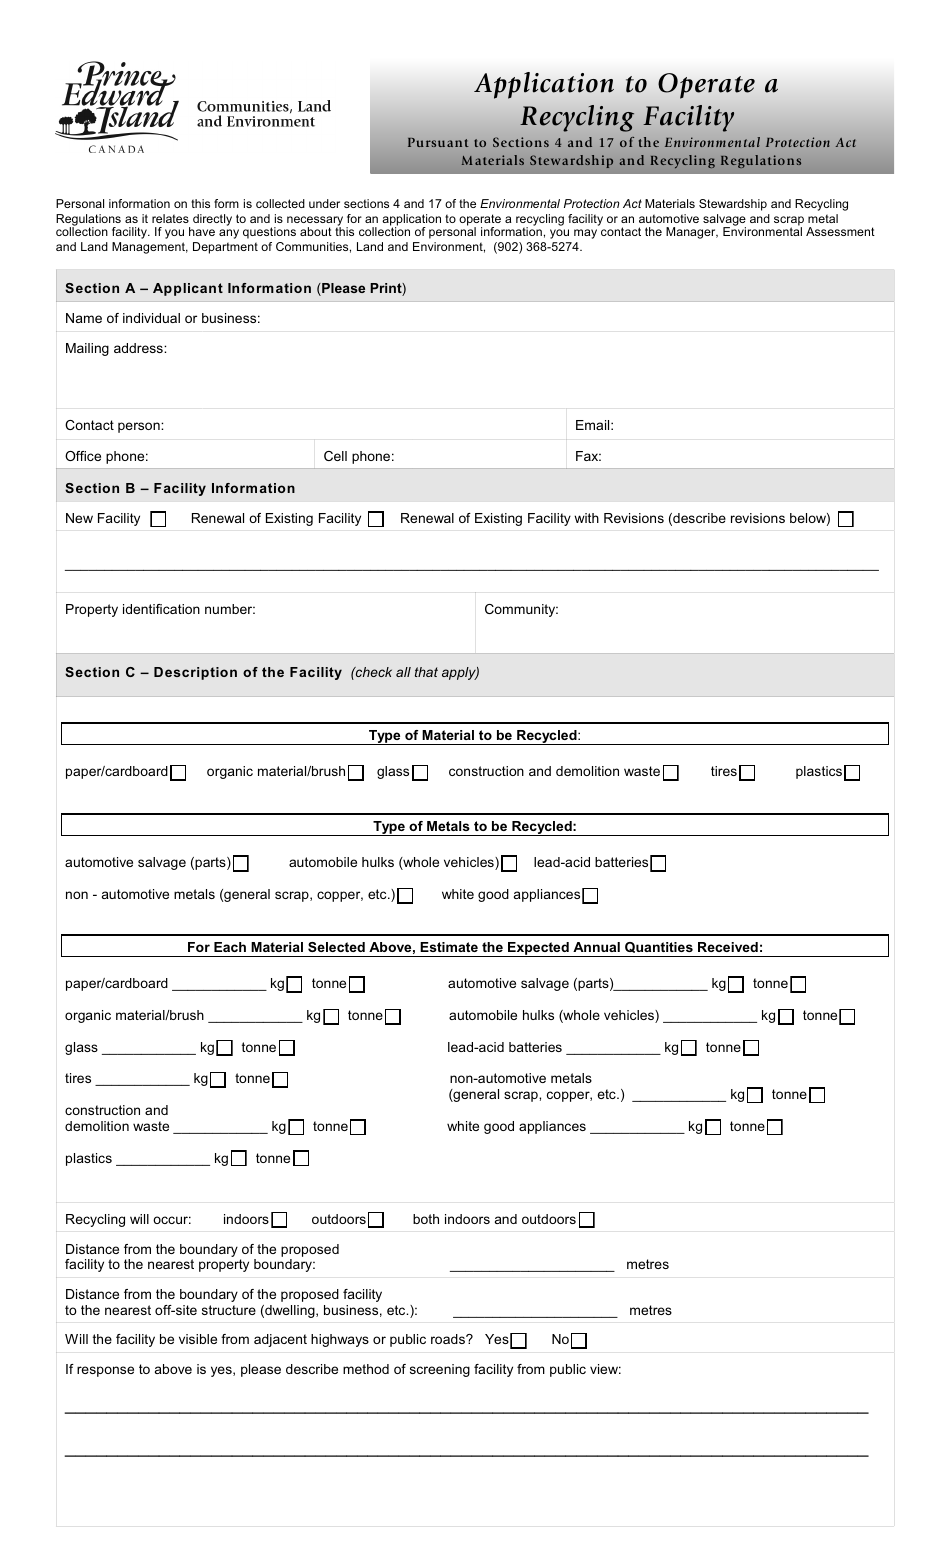 Application to Operate a Recycling Facility - Prince Edward Island, Canada, Page 1